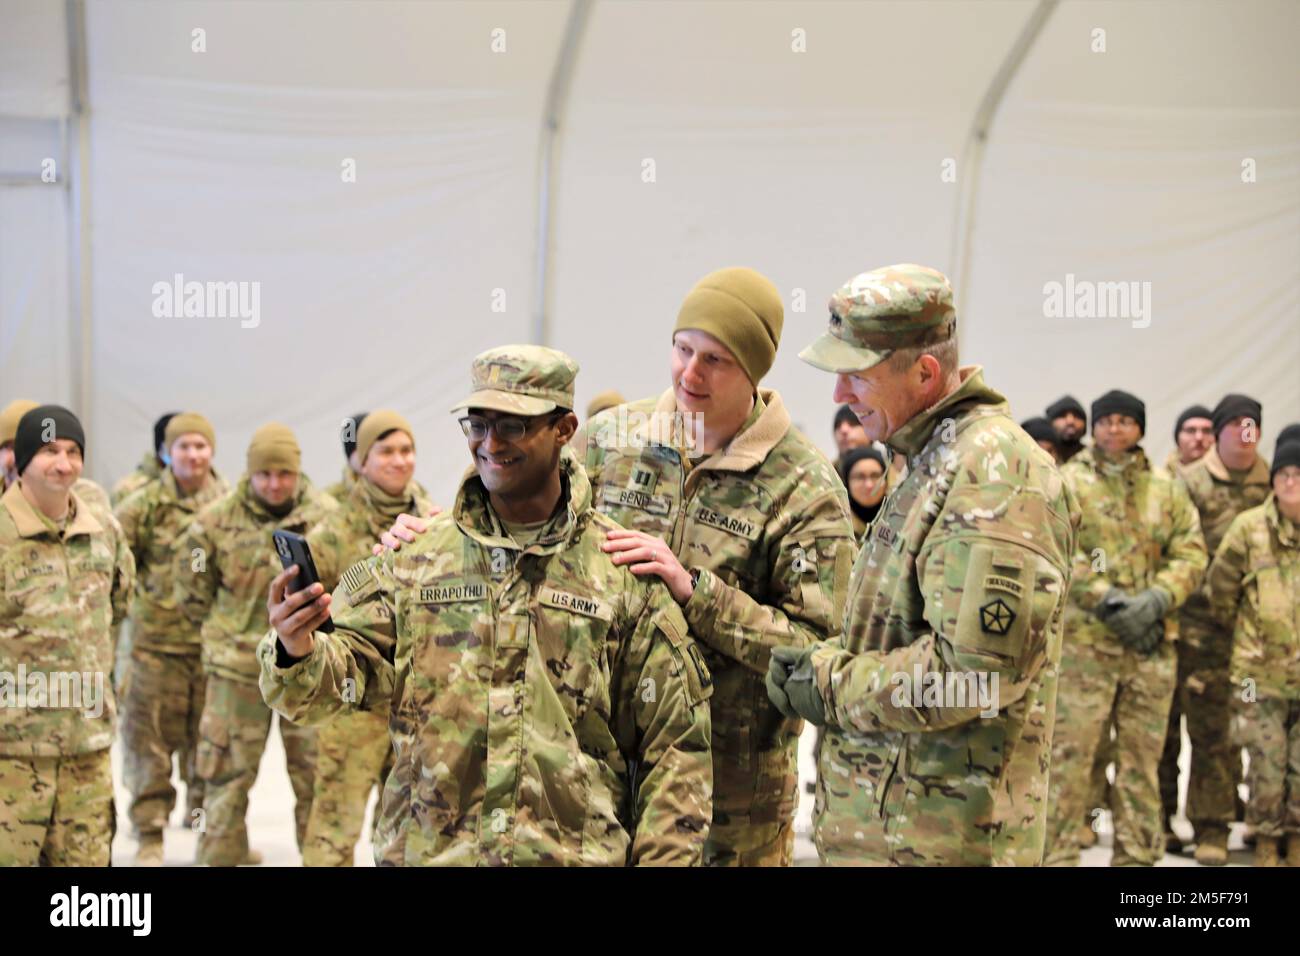 Maj. Gen. Jeffery Broadwater, deputy commanding general, V Corps, spoke with 2nd Lt. Akil Errapothu, ordnance officer, Headquarters and Headquarters Company, 1-3rd Attack Battalion prior to presenting Errapothu with a coin during a visit to Lielvārde Air Base, March 10, 2022. Capt. Dylan Benit (center), commander, Headquarters and Headquarters Company, 1-3rd Attack Battalion, spoke to Errapothu’s wife on the phone about his performance during exercise Saber Strike 22. Broadwater met with the Soldiers of the 1-3rd Attack Battalion and recognized four members of the unit for their performance. Stock Photo